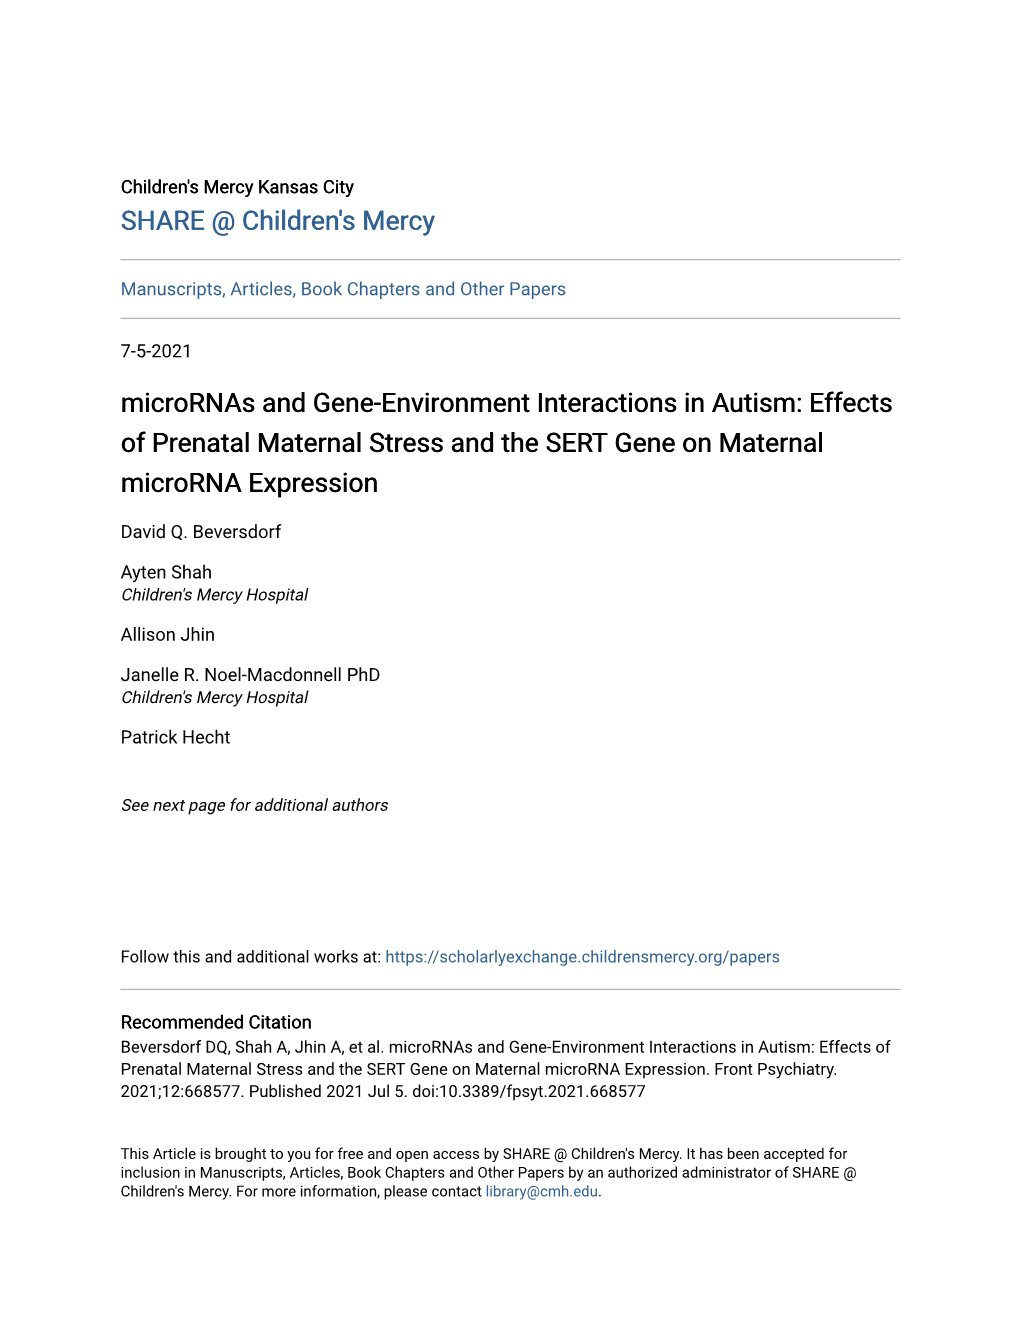 Micrornas and Gene-Environment Interactions in Autism: Effects of Prenatal Maternal Stress and the SERT Gene on Maternal Microrna Expression